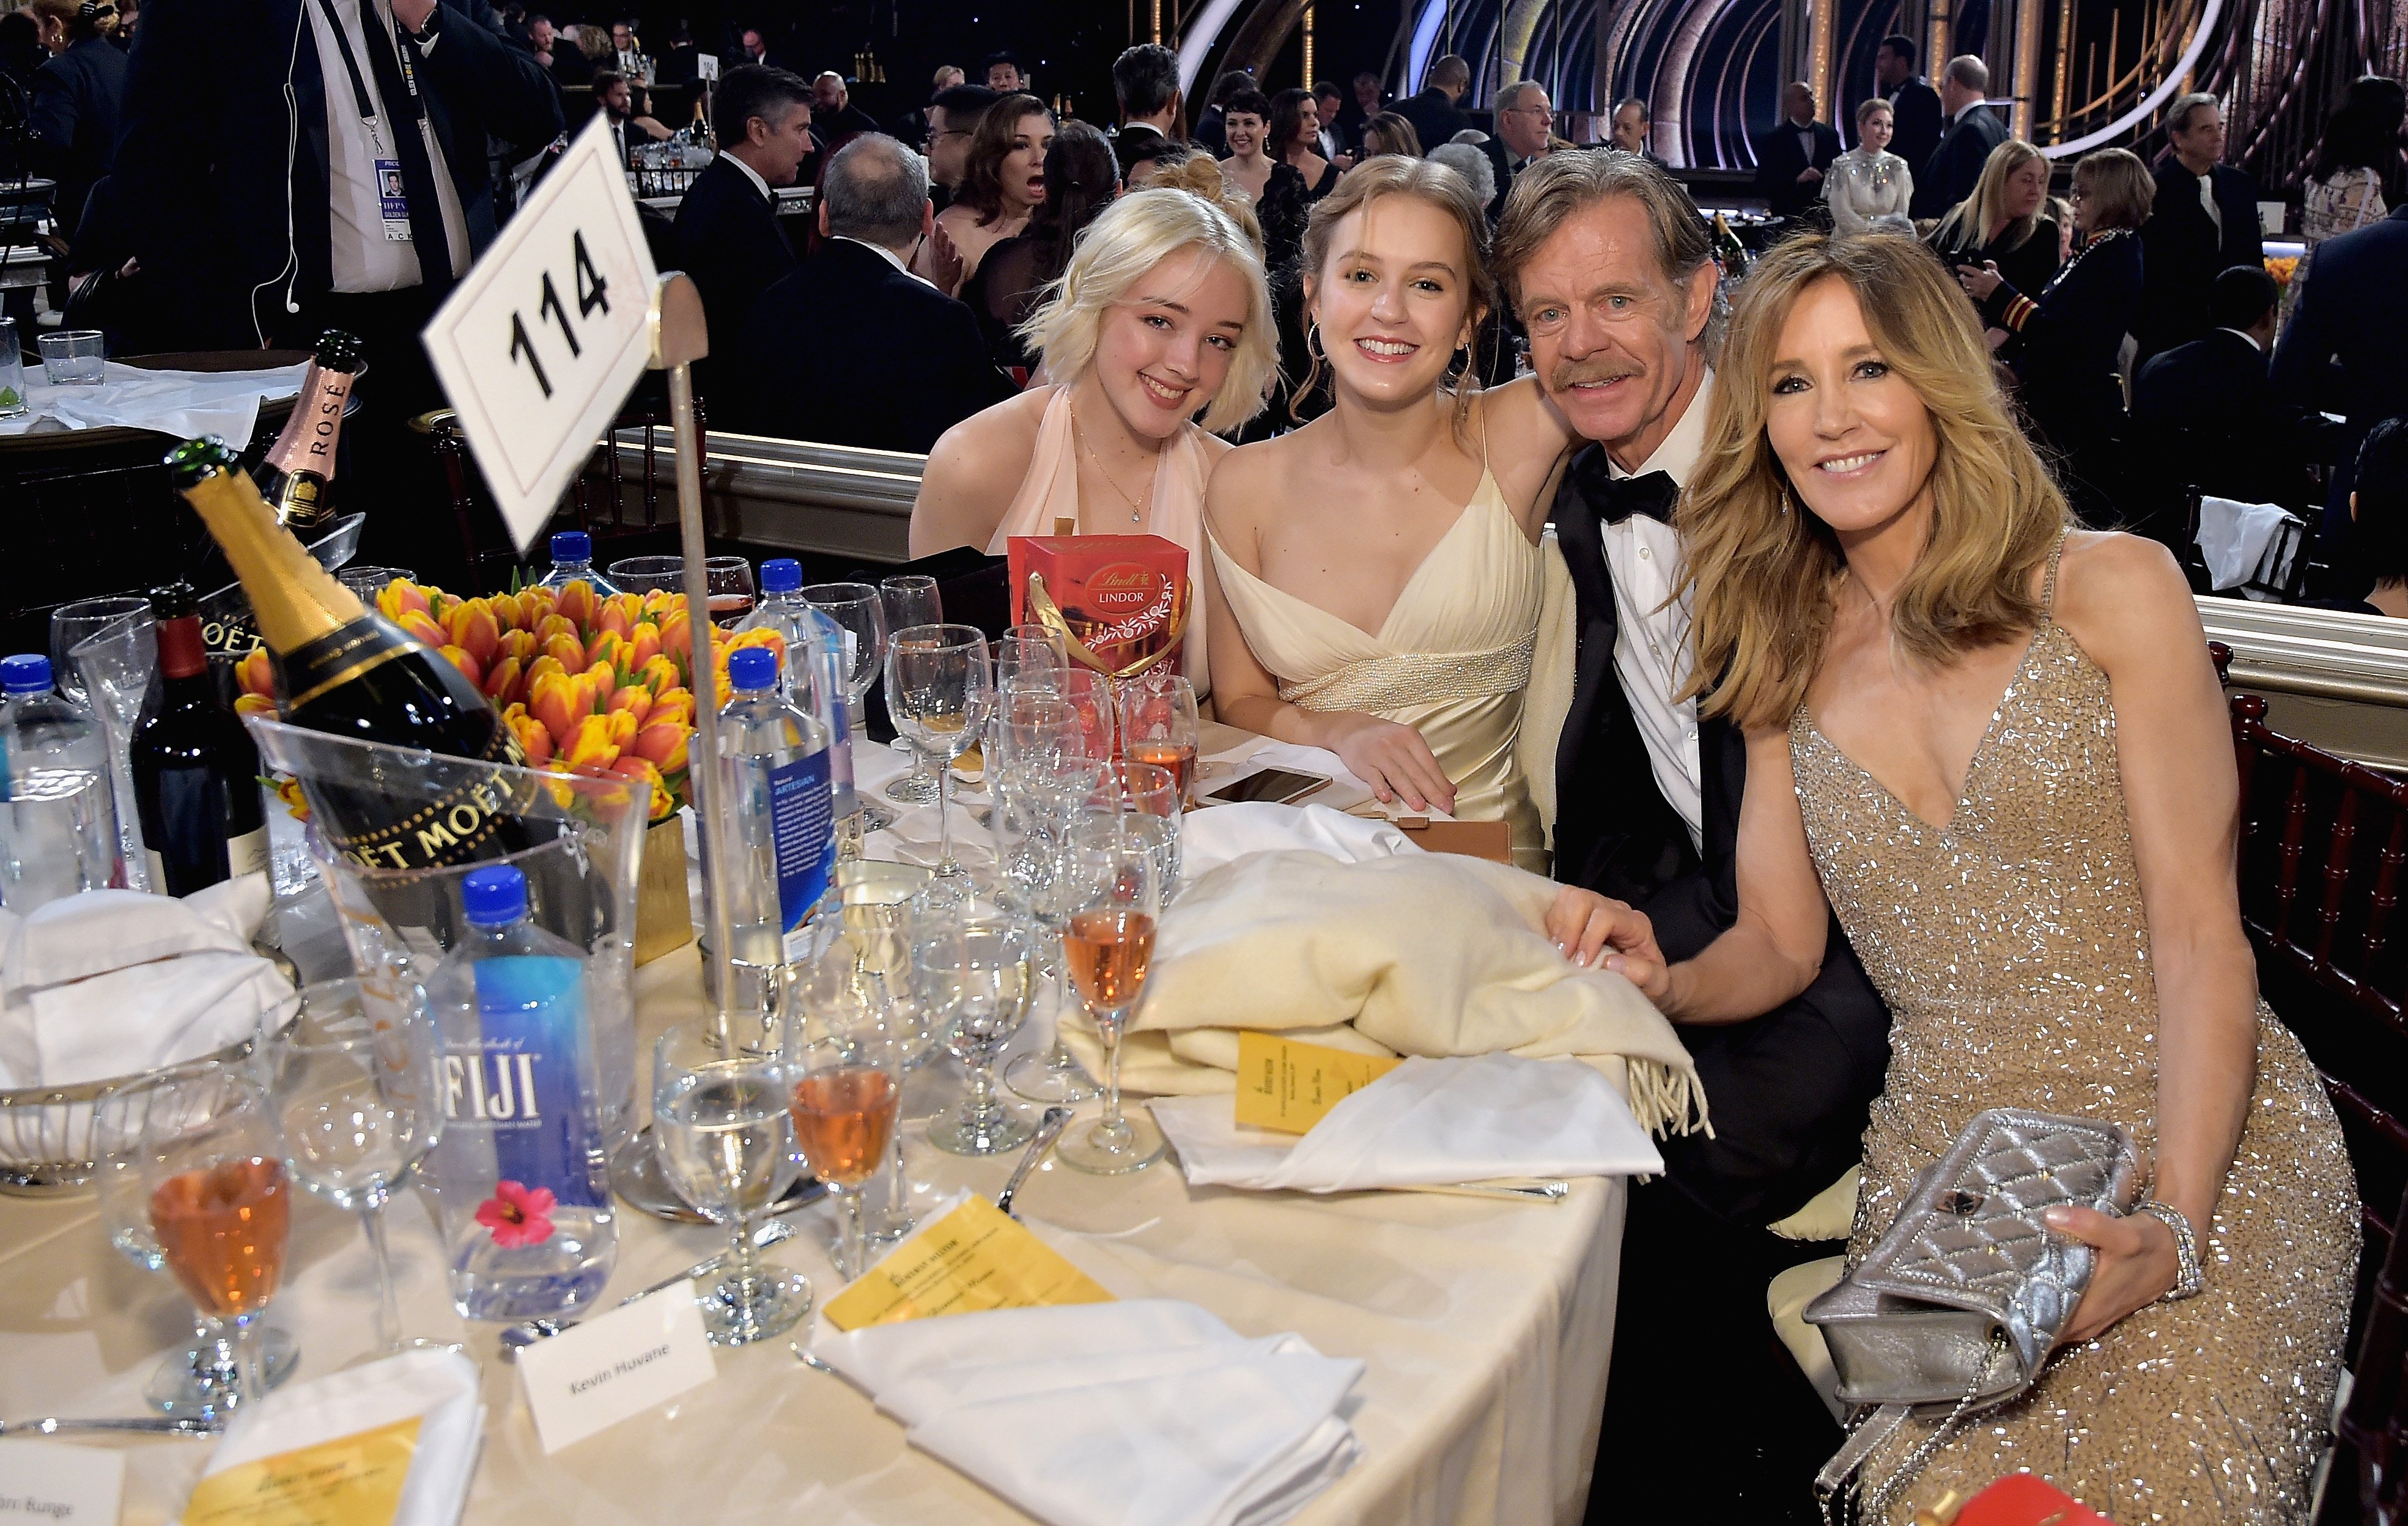 (L-R)Sophia, Georgia, William H. Macy, & Felicity Huffman at the 76th Annual Golden Globe Awards on Jan. 6, 2019 in California | Photo: Getty Images